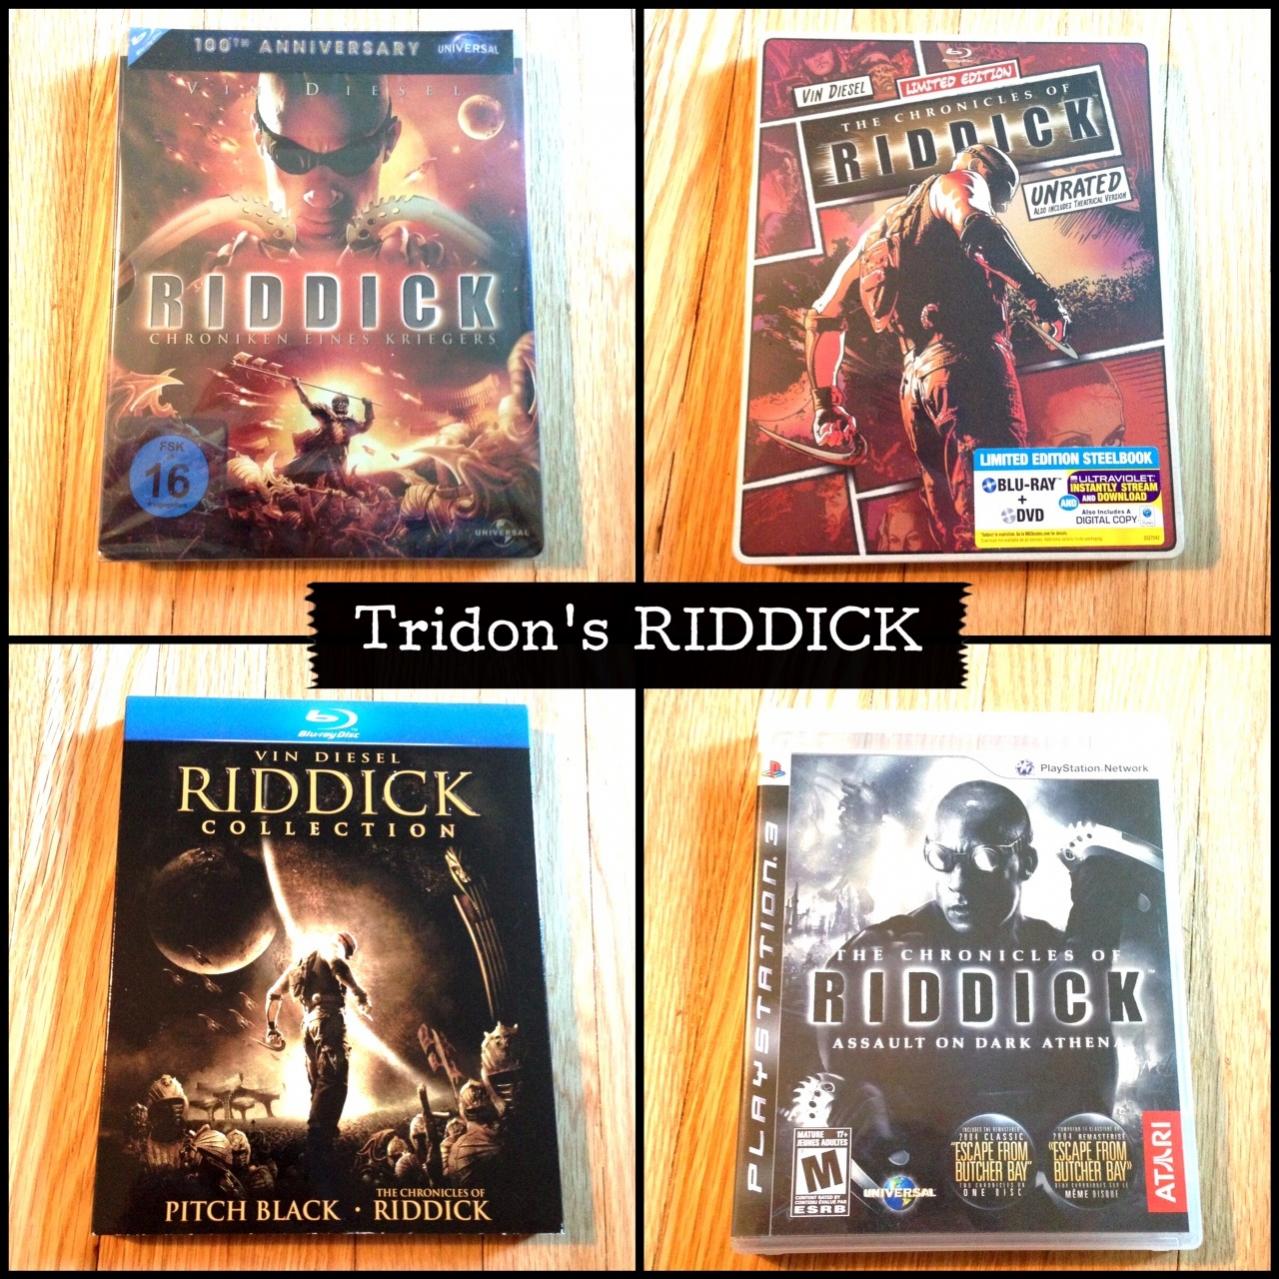 Clockwise, Left to Right: The Chronicles of Riddick German Blu-ray SteelBook (Universal 100th Anniversary), The Chronicles of Riddick US Blu-ray SteelBook (Universal Reel Heroes), The Chronicles of Riddick: Assault on Dark Athena (PS3 game), The Riddick Collection US Blu-ray w/ slipcover.